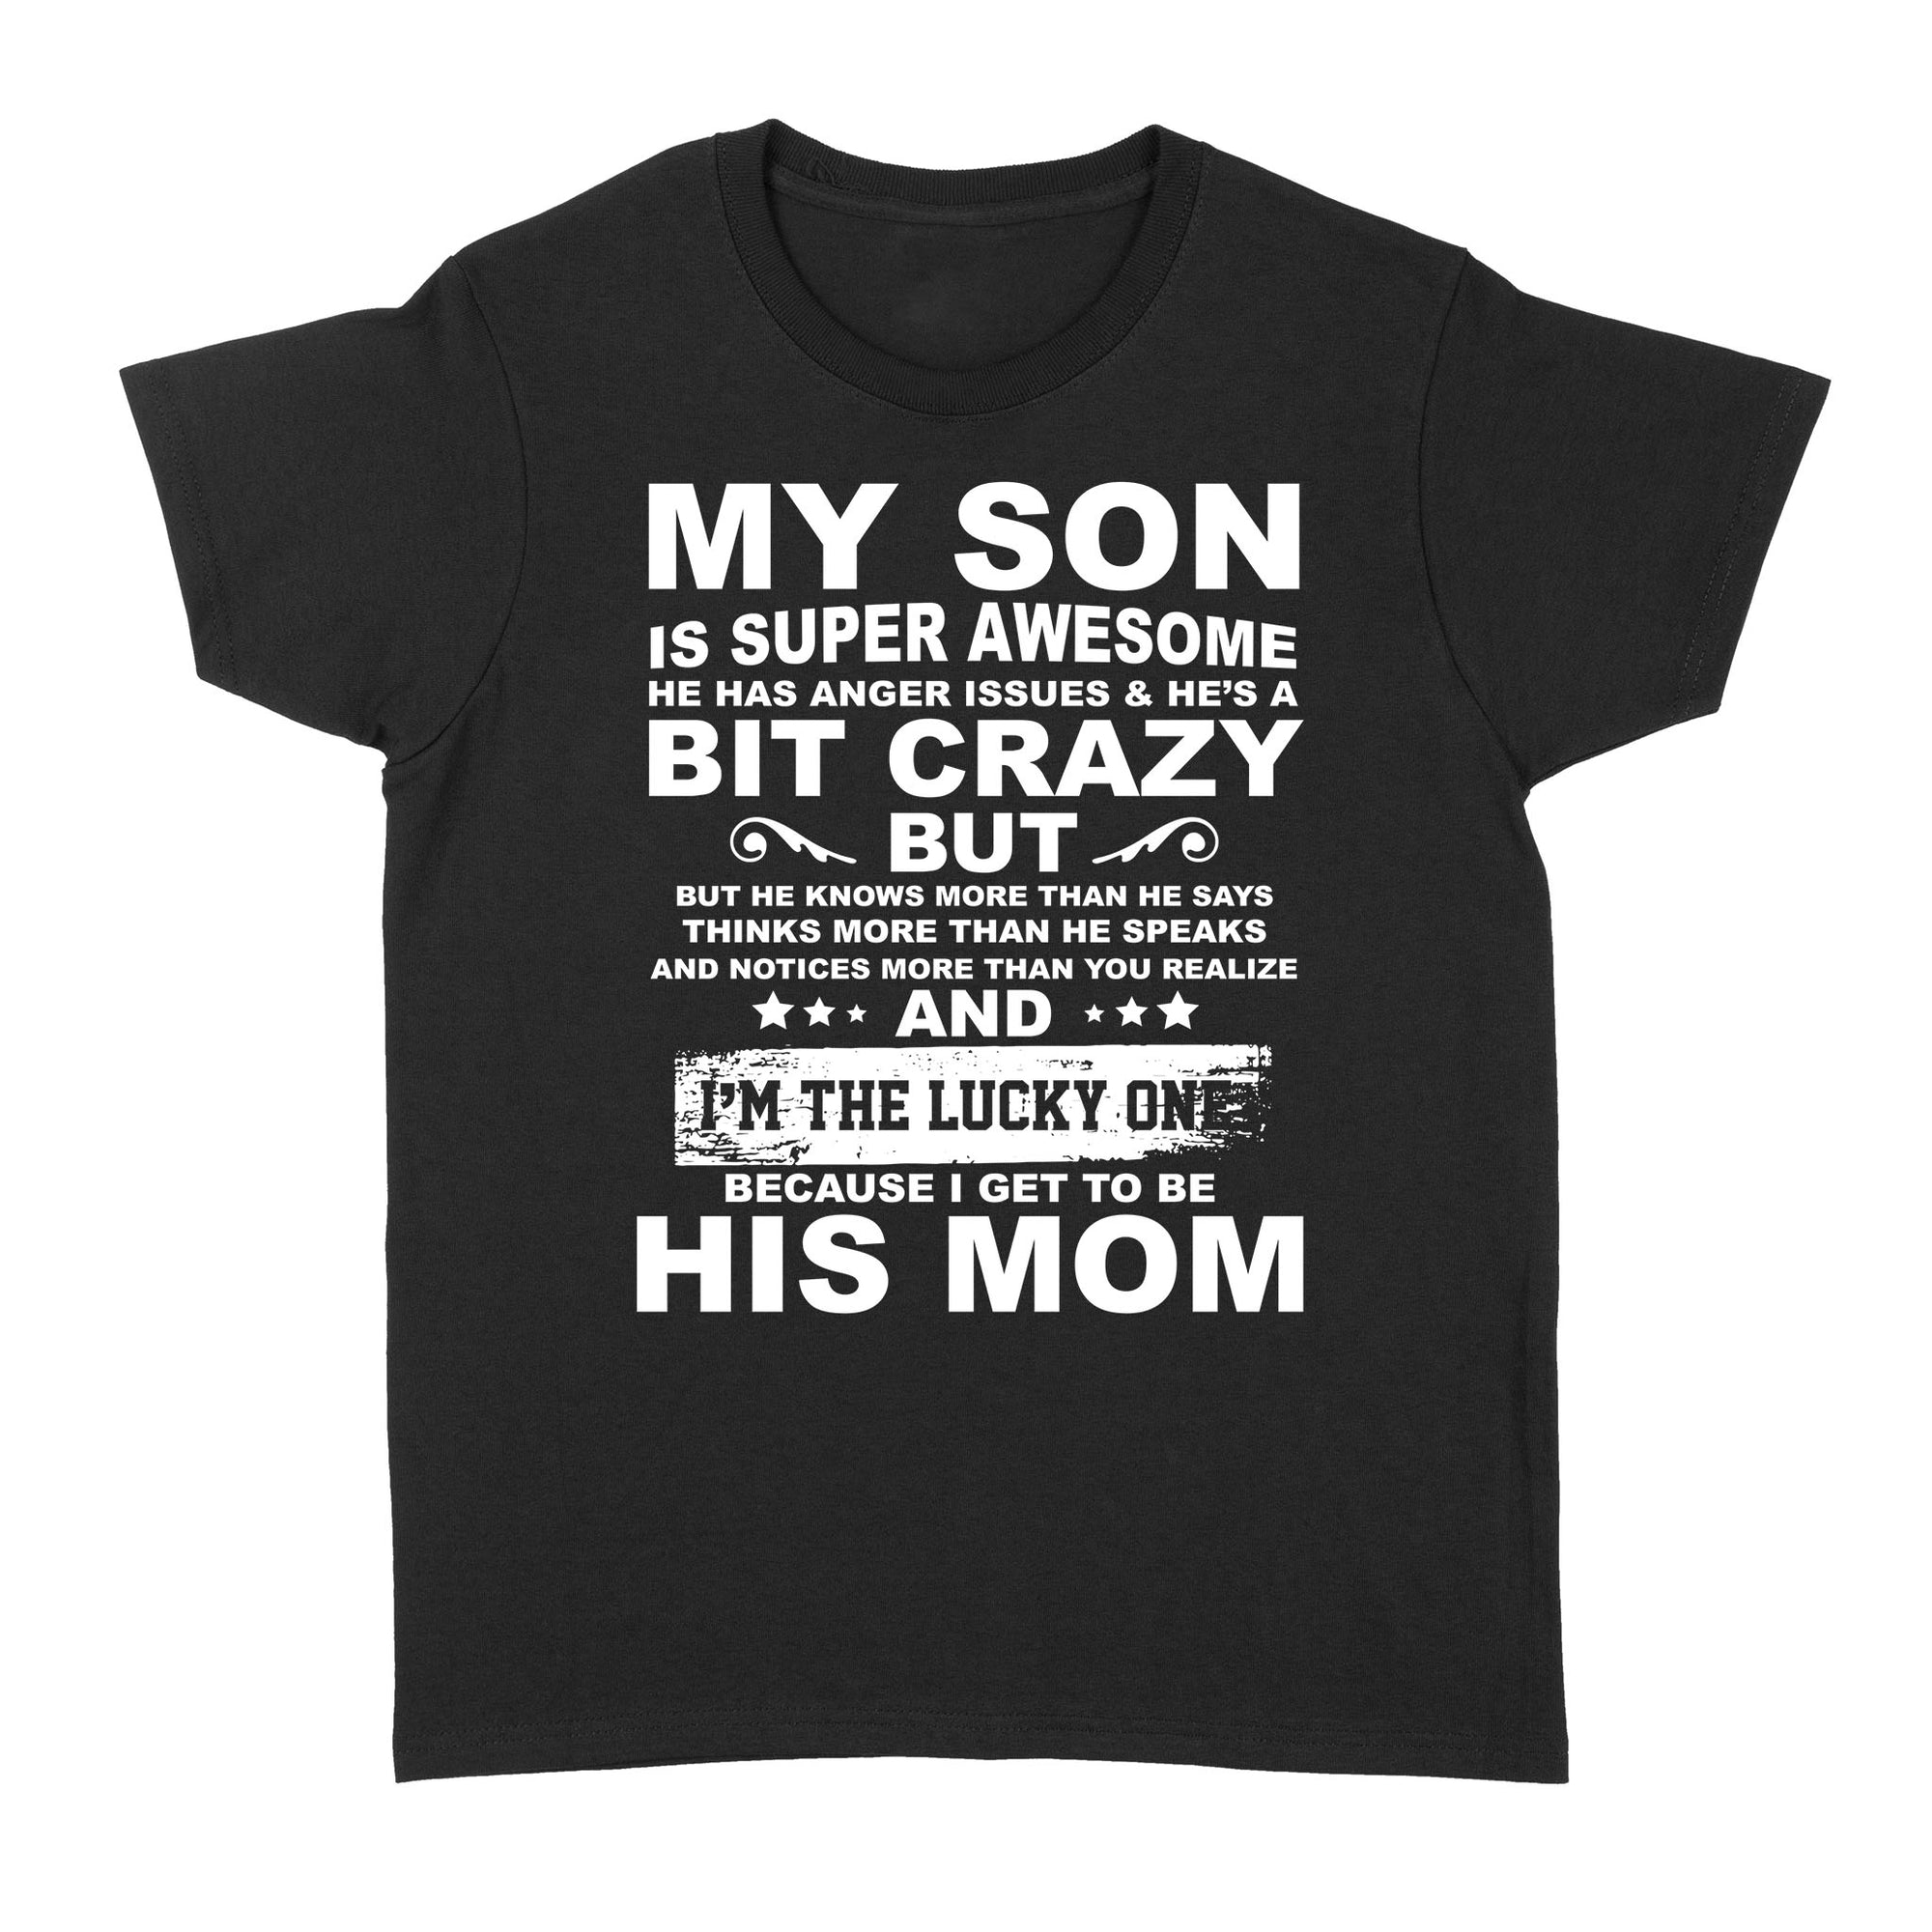 My Son Is Awesome He Has Anger Issues Crazy  I'm Lucky I Get To Be His Mom Funny Gift Ideas for Mom from Son Christmas - Standard Women's T-shirt